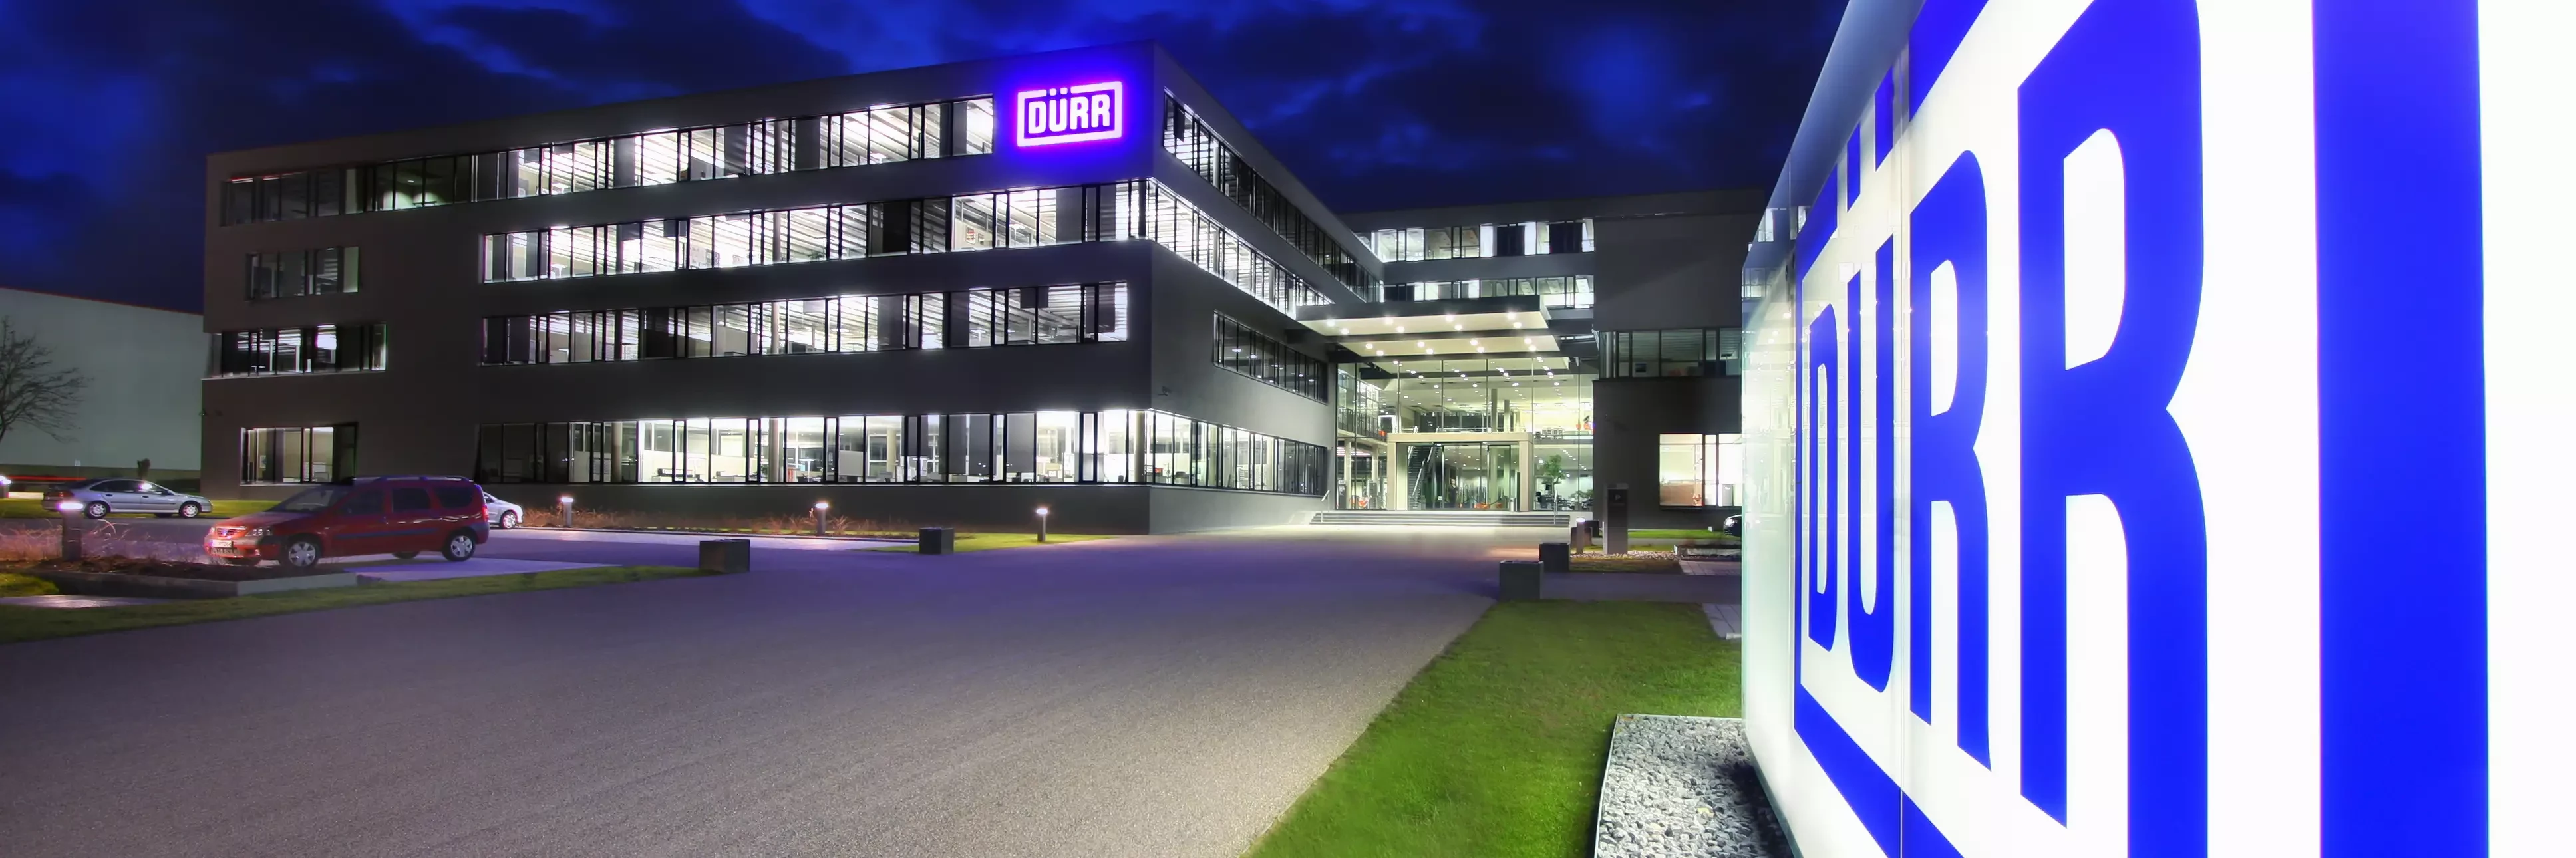 duerr location headquarters in germany at night viewing the shining logo in the front of the building